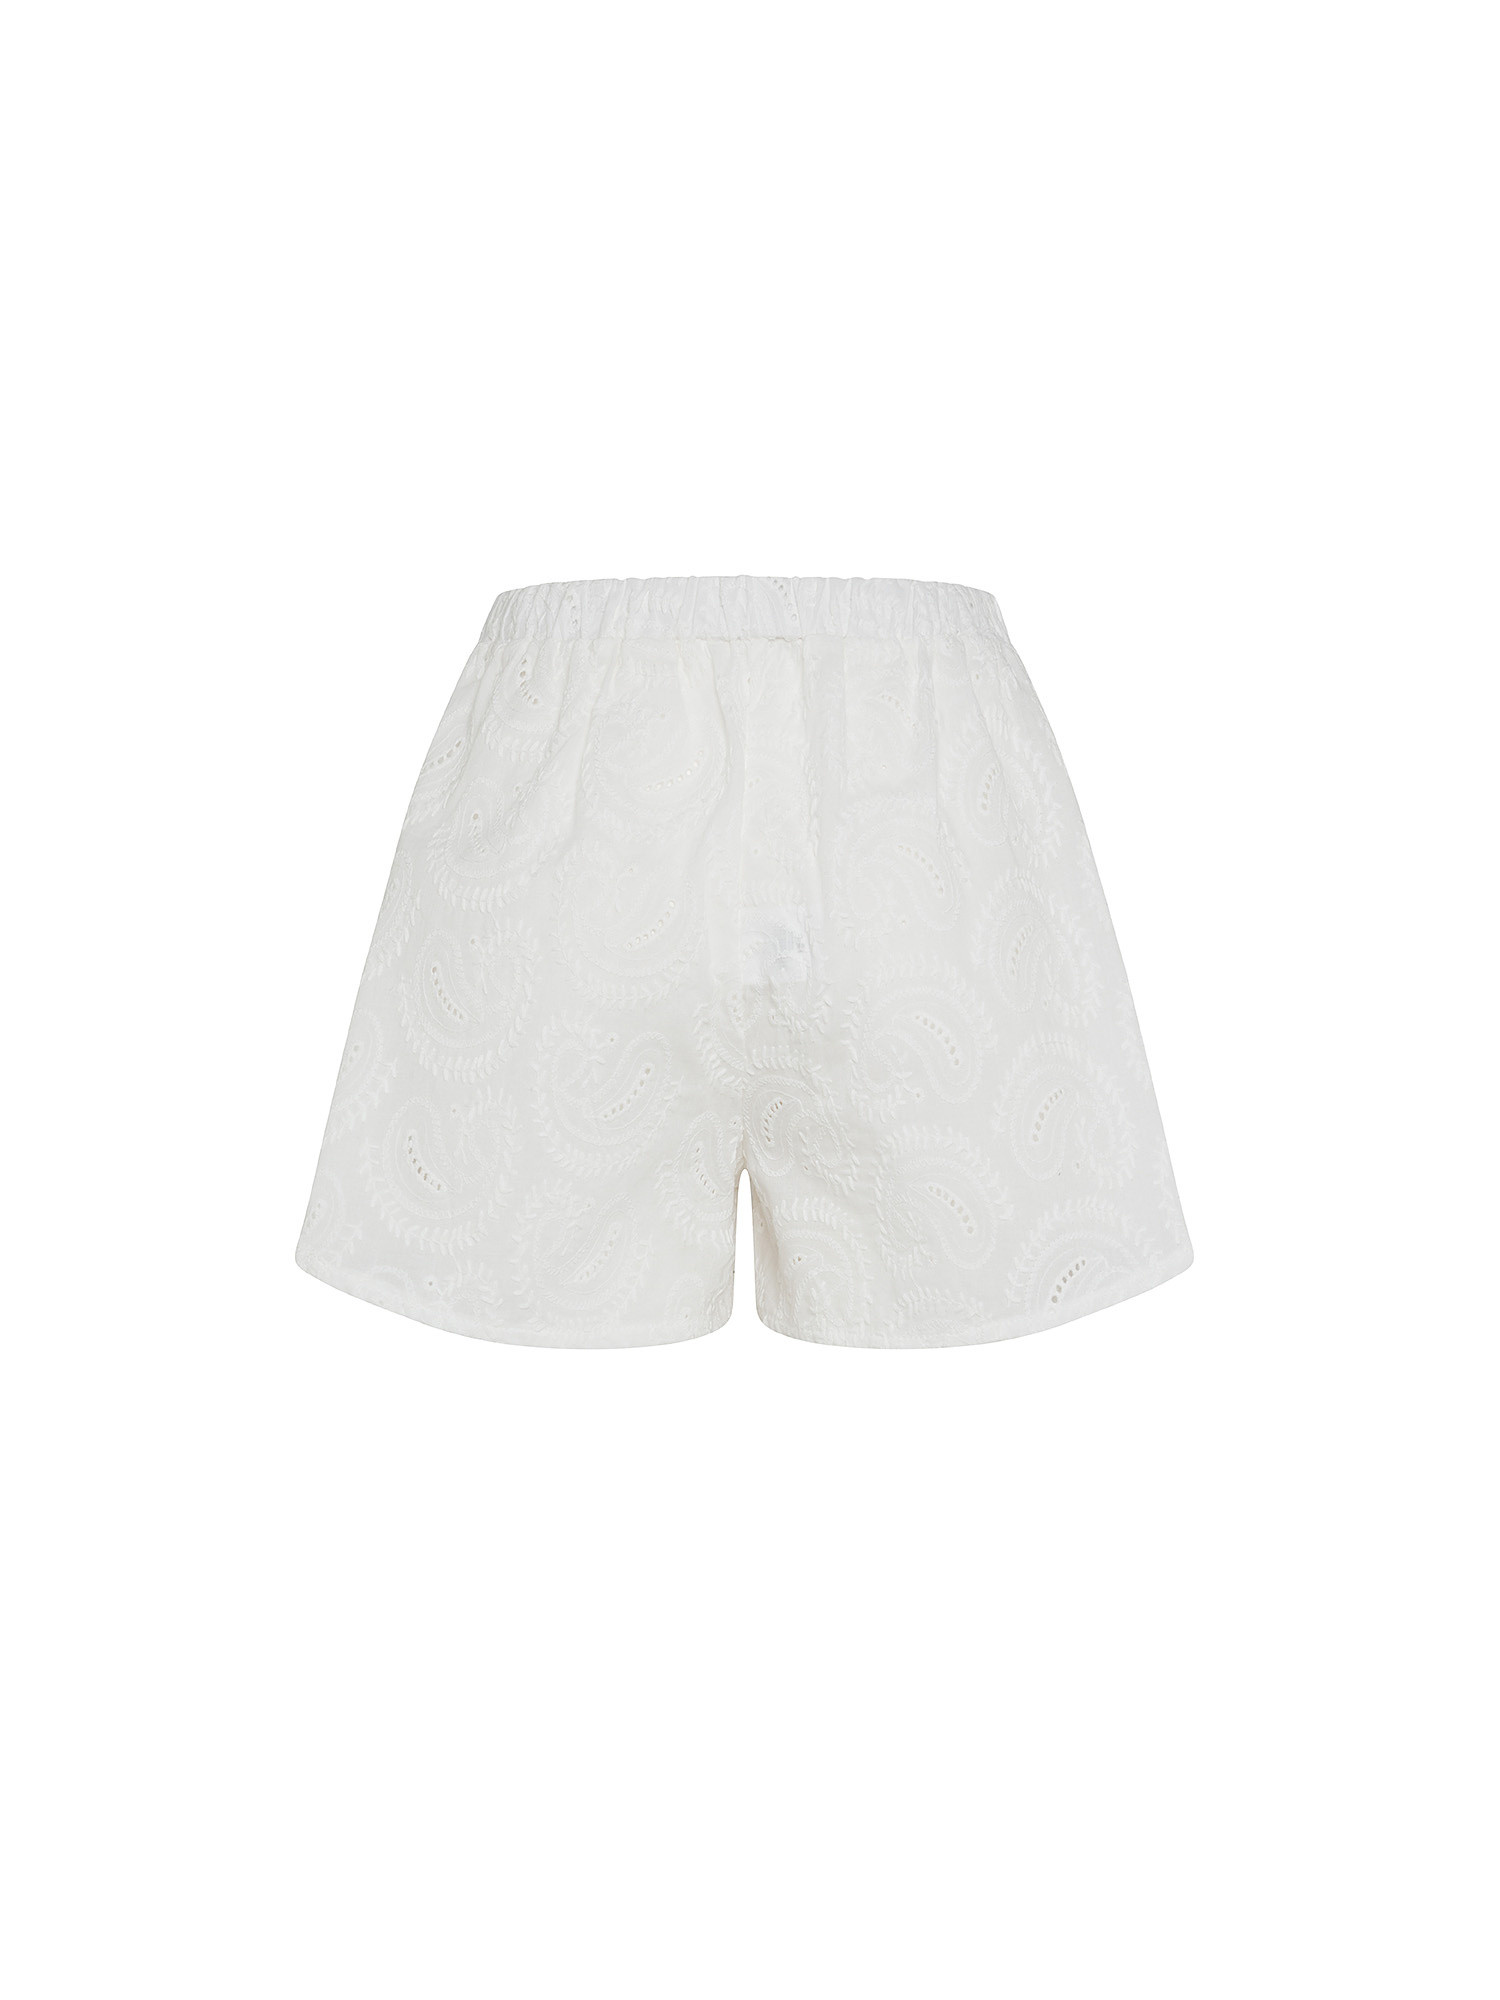 Solid color sangallo shorts in cotton, White, large image number 1